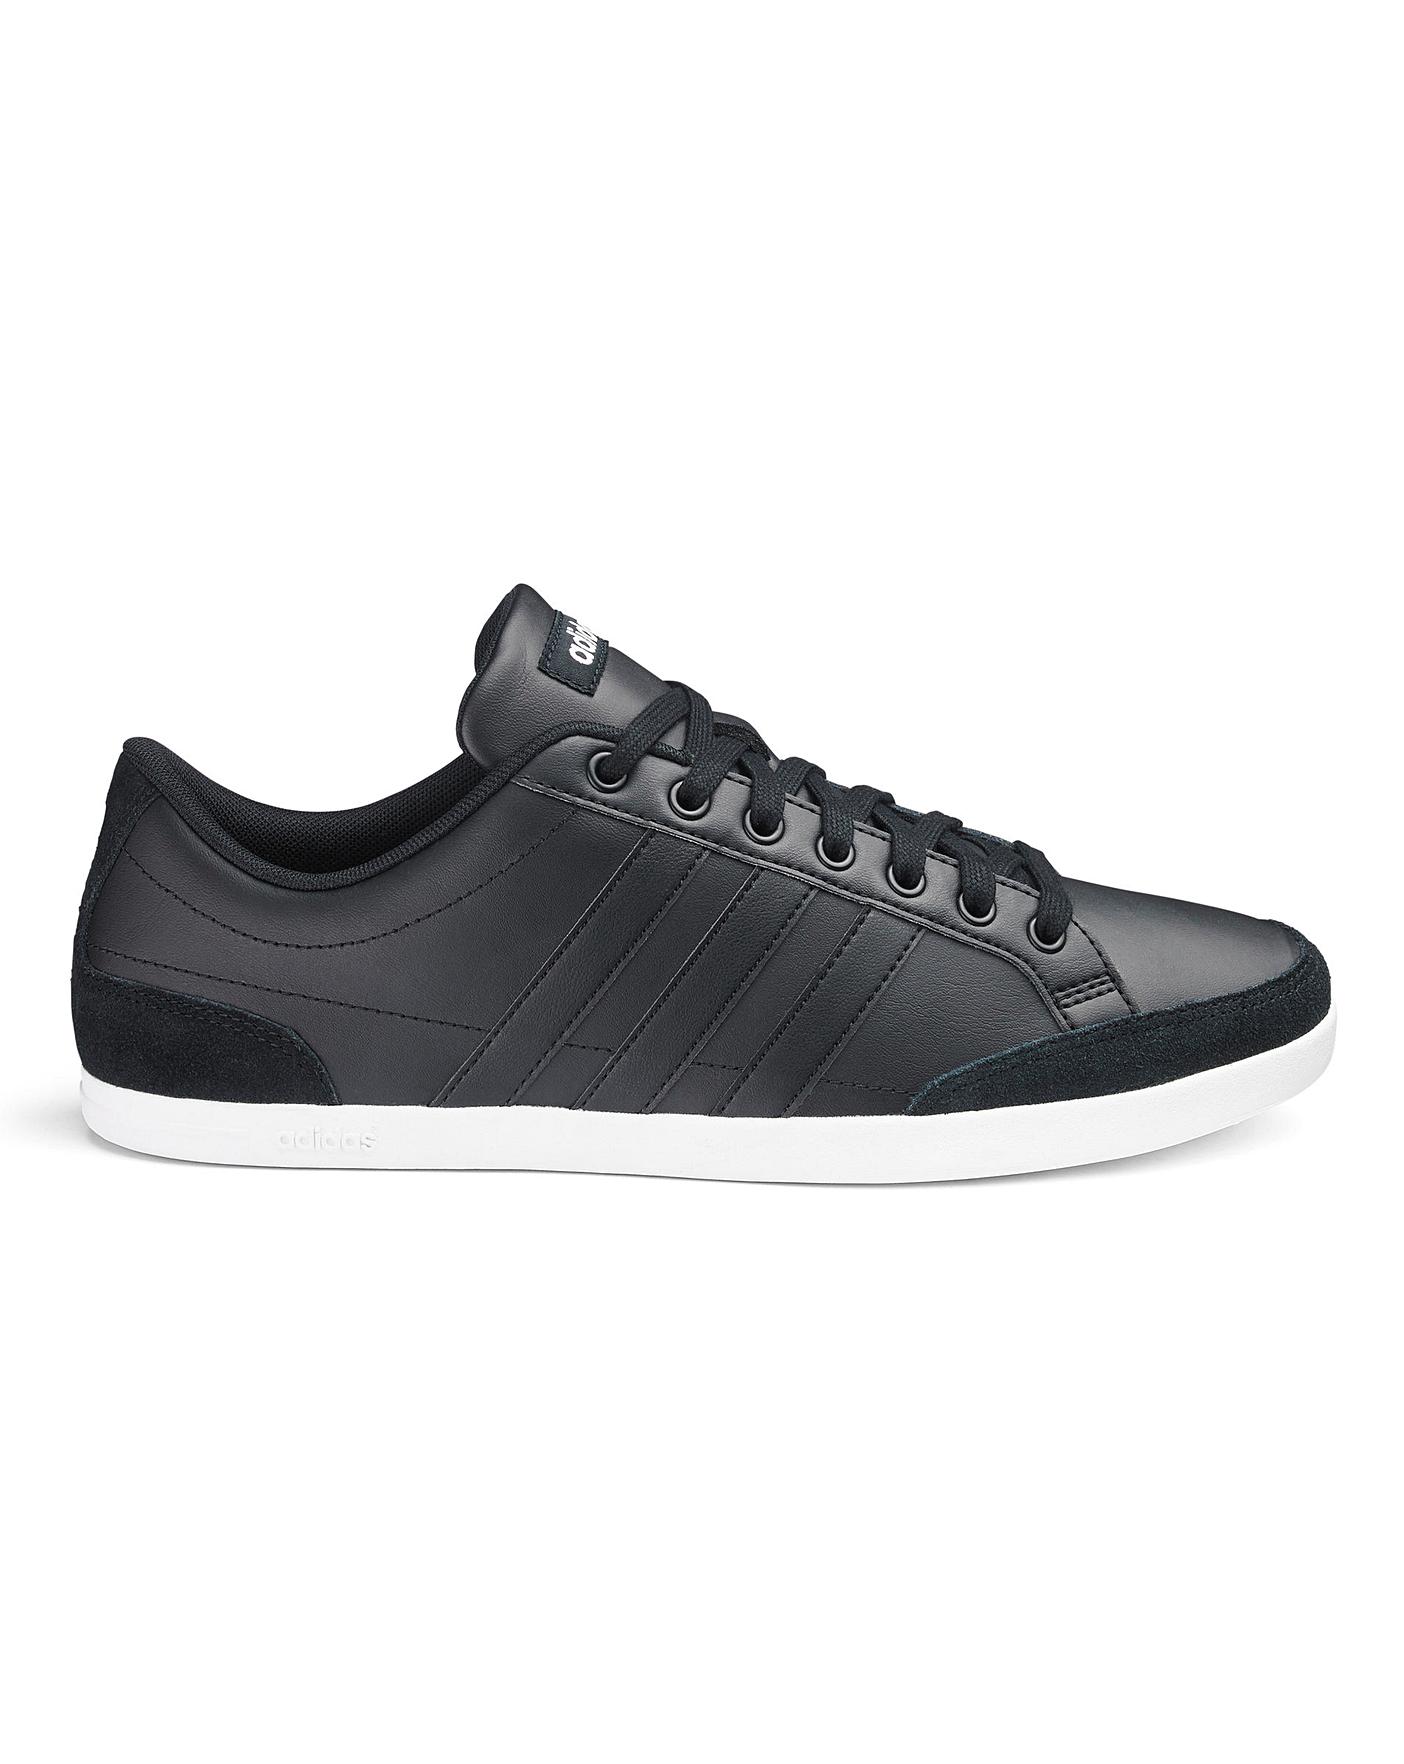 adidas caflaire trainers